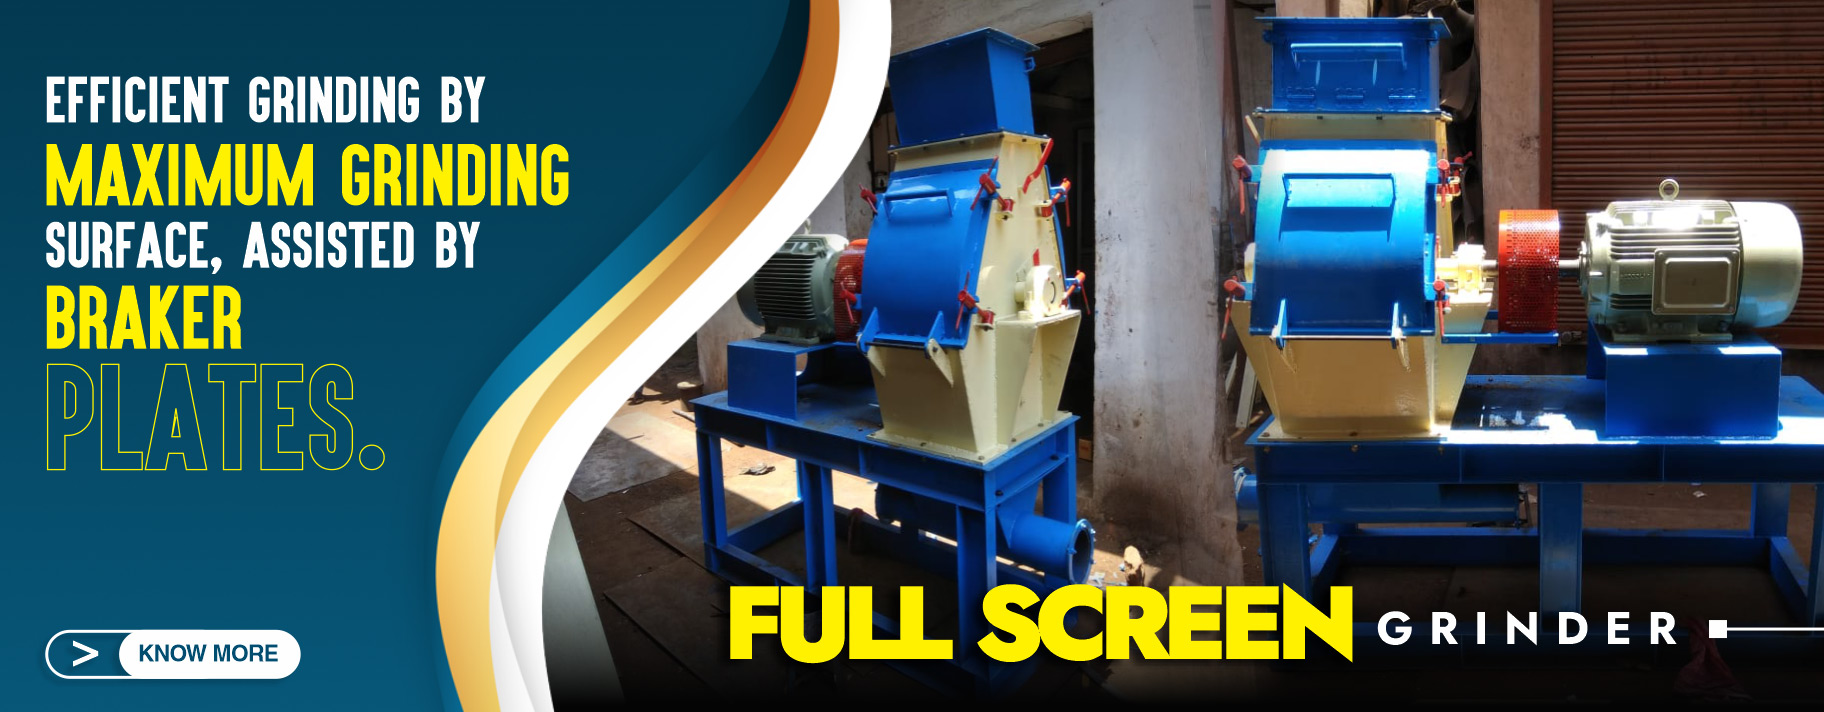 Cattle Feed Plant Machine Banner